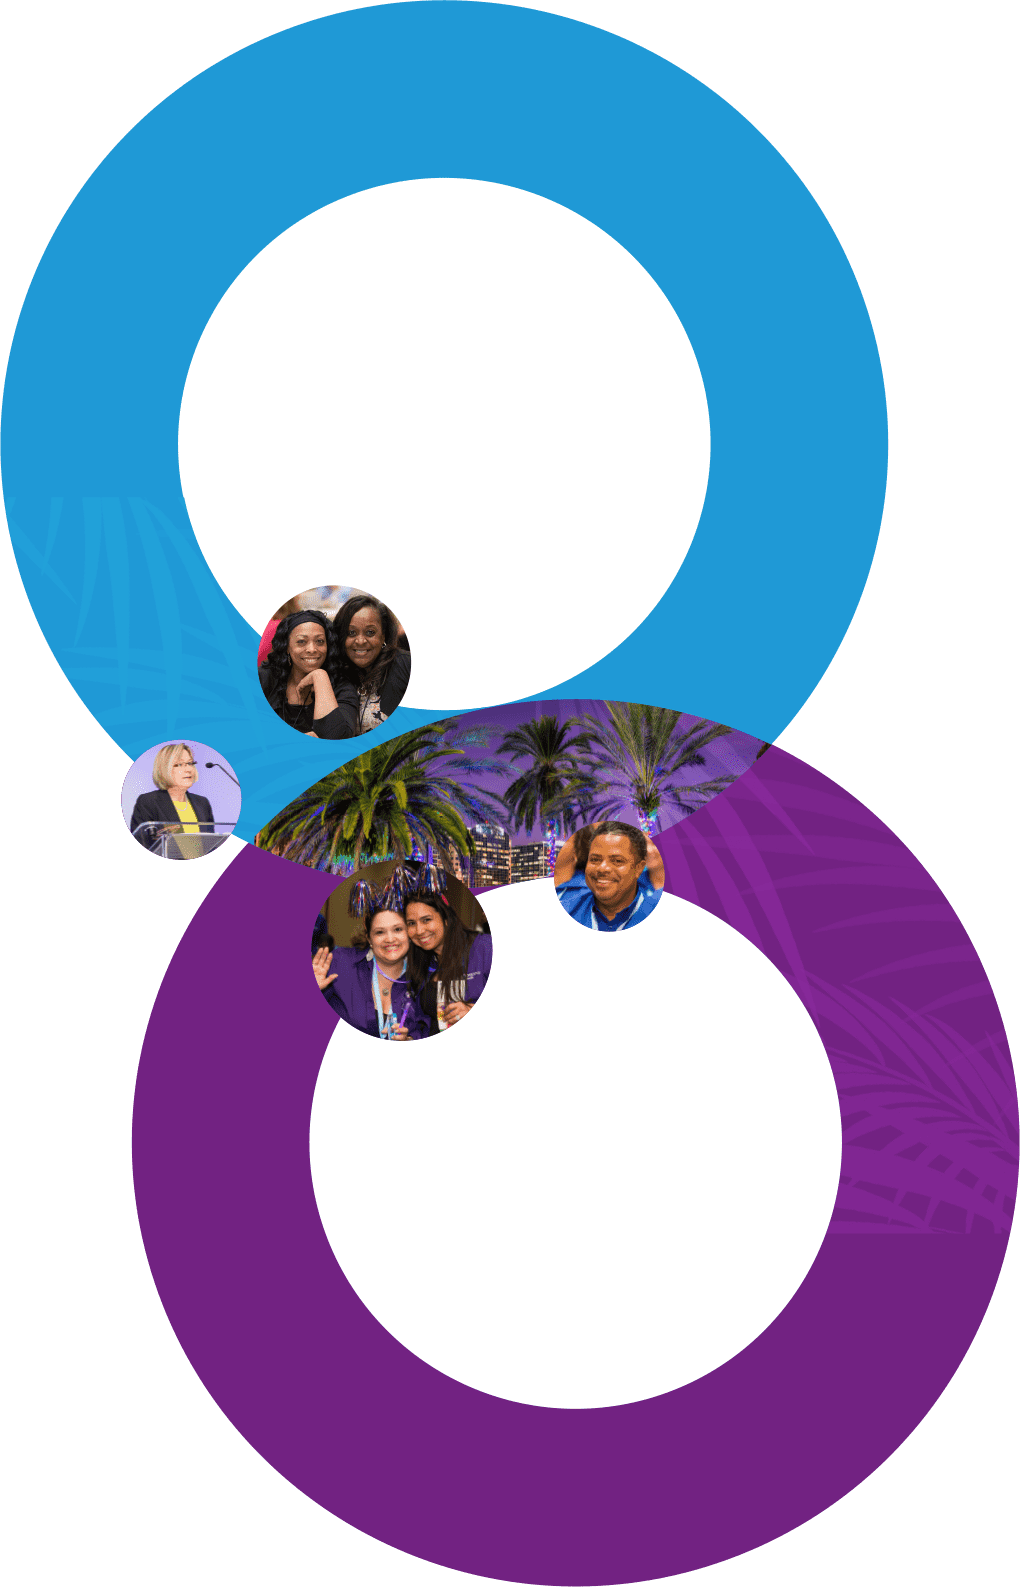 Register For The 2019 Ancc Pathway To Excellence Conference® - Circle (1020x1587)